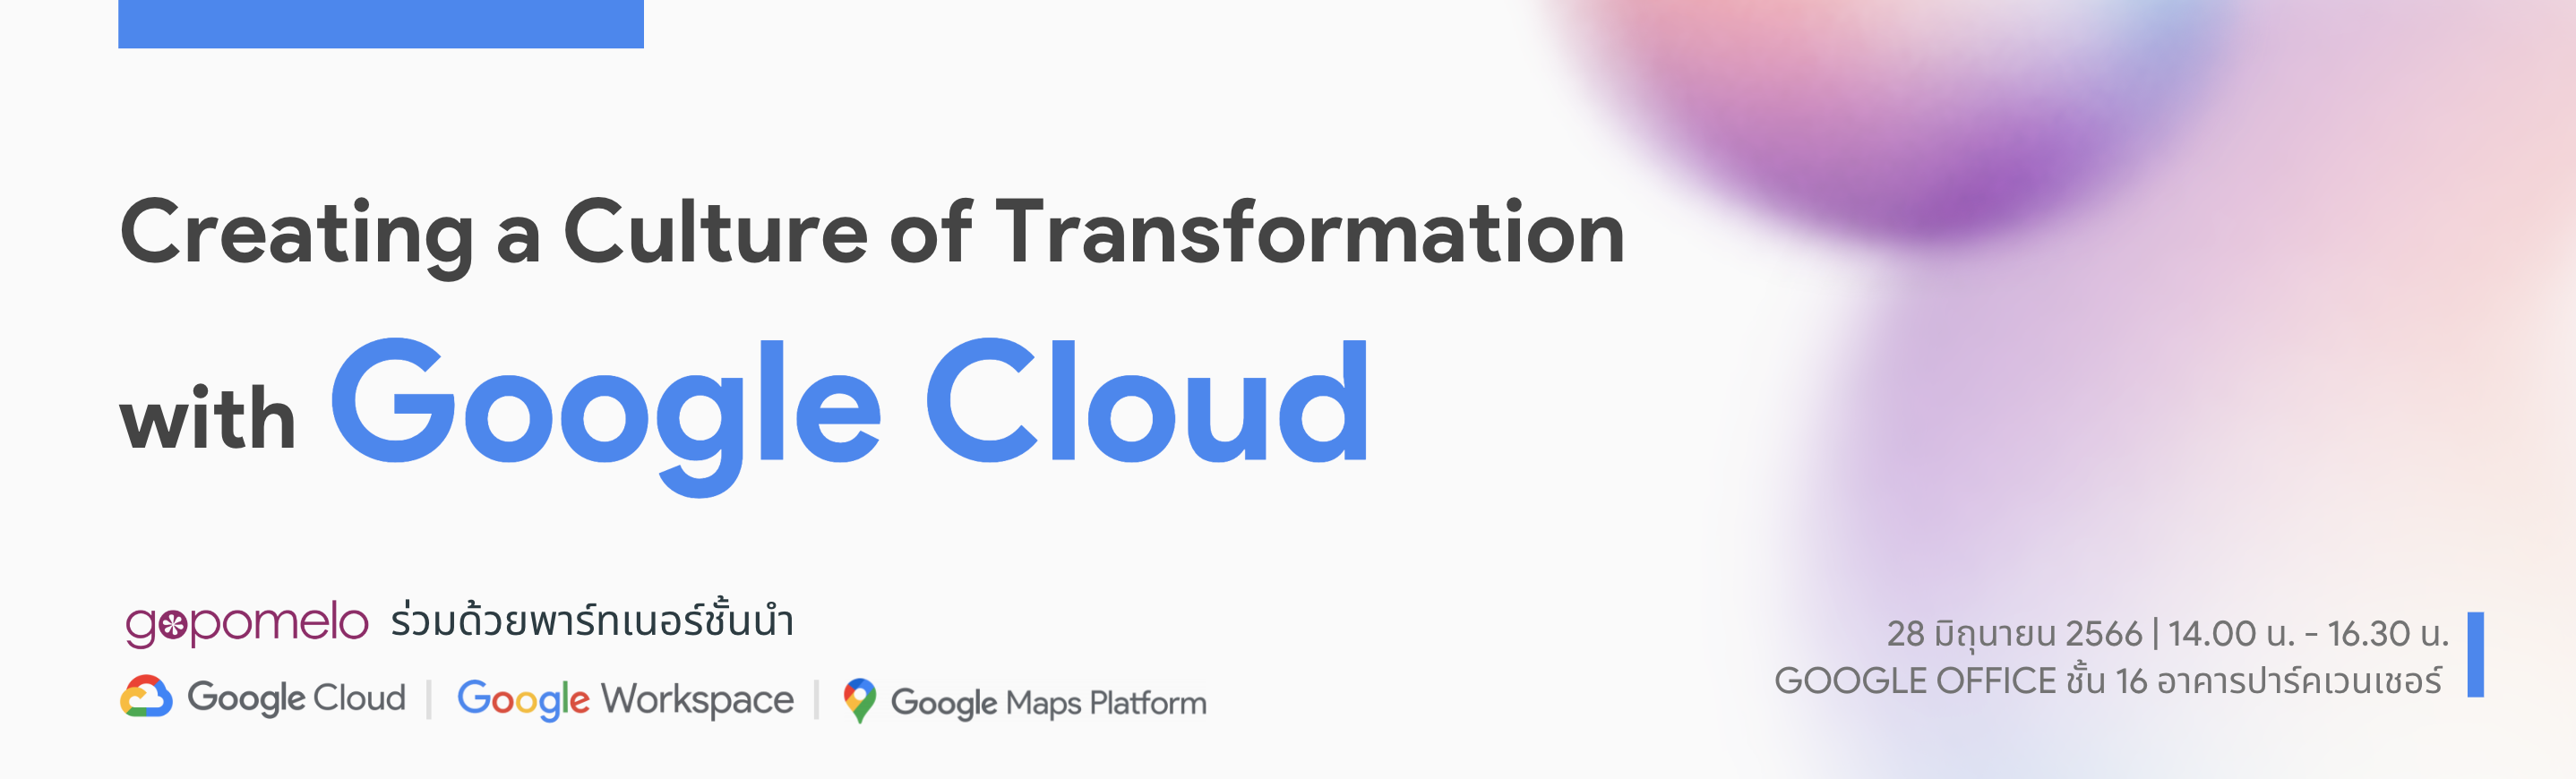 Creating a Culture of Transformation with Google Cloud